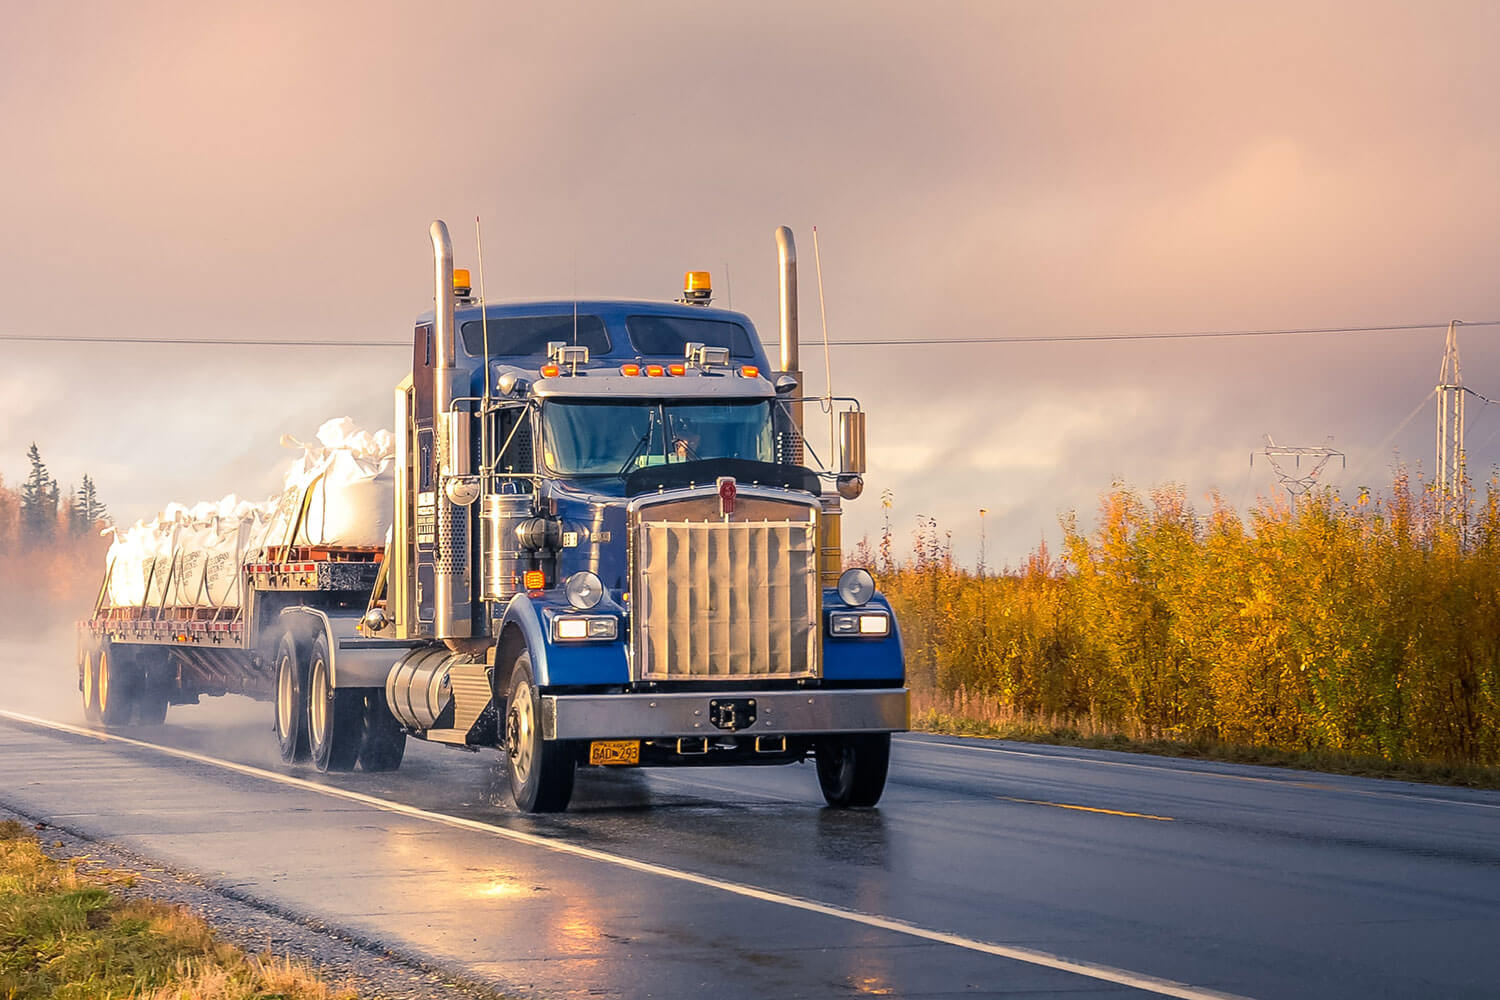 Holiday Driving Tips for Truckers - Semi Truck Parts and Accessories